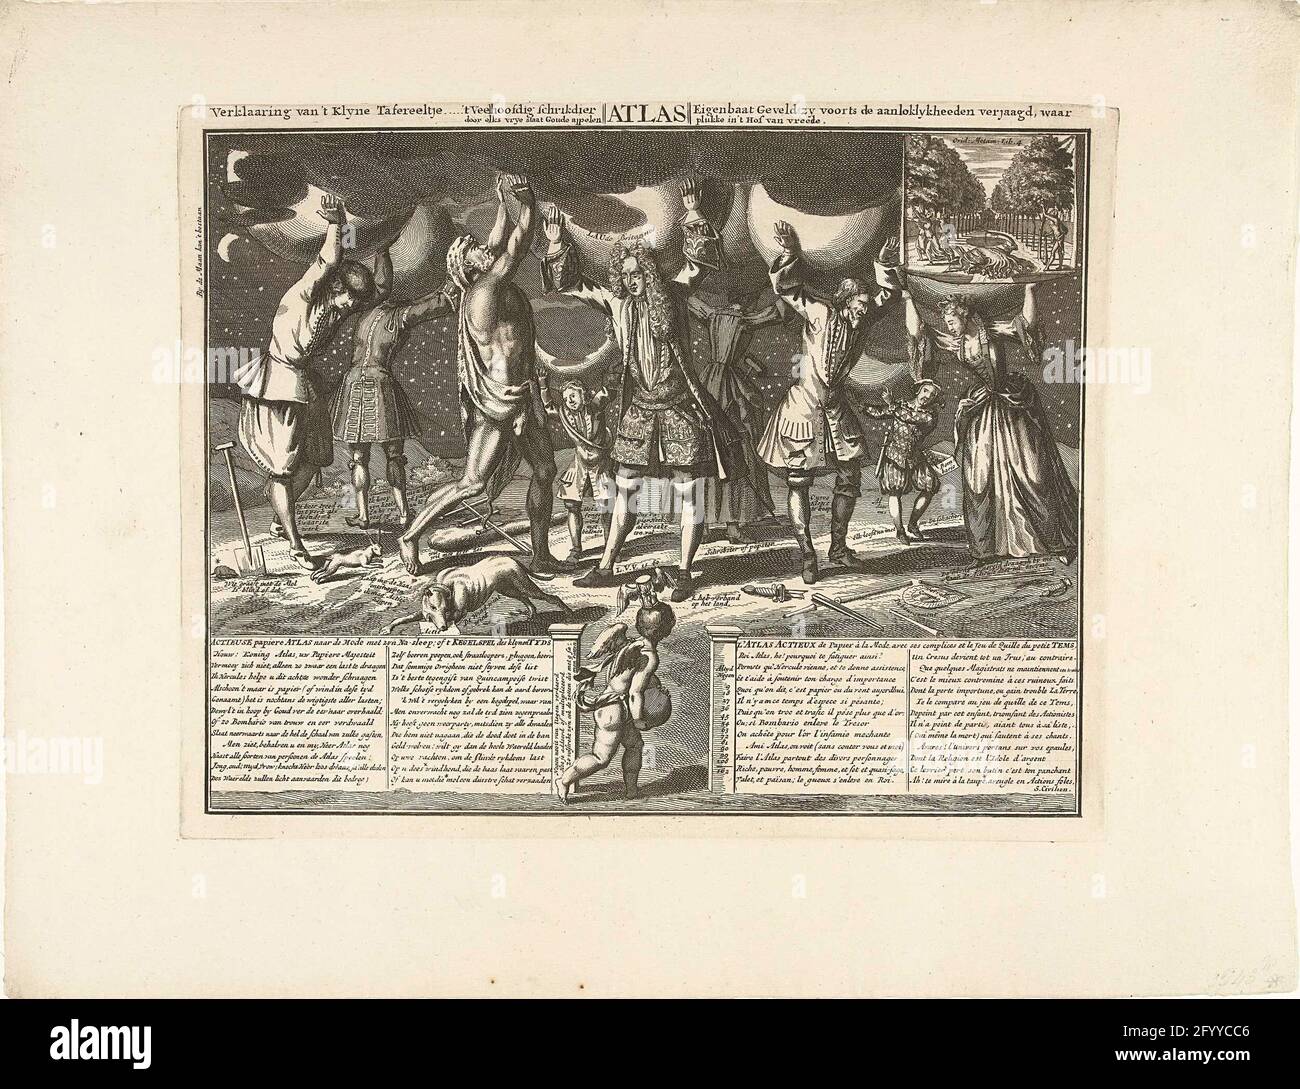 Denemarken Snelkoppelingen Ideaal John Law and others toring their debts on their shoulders, 1720; Actionuse  paper atlas to fashion with his after-trail; or t bone game des  Klelynentypds / l'Atlas Actieux the paper à la